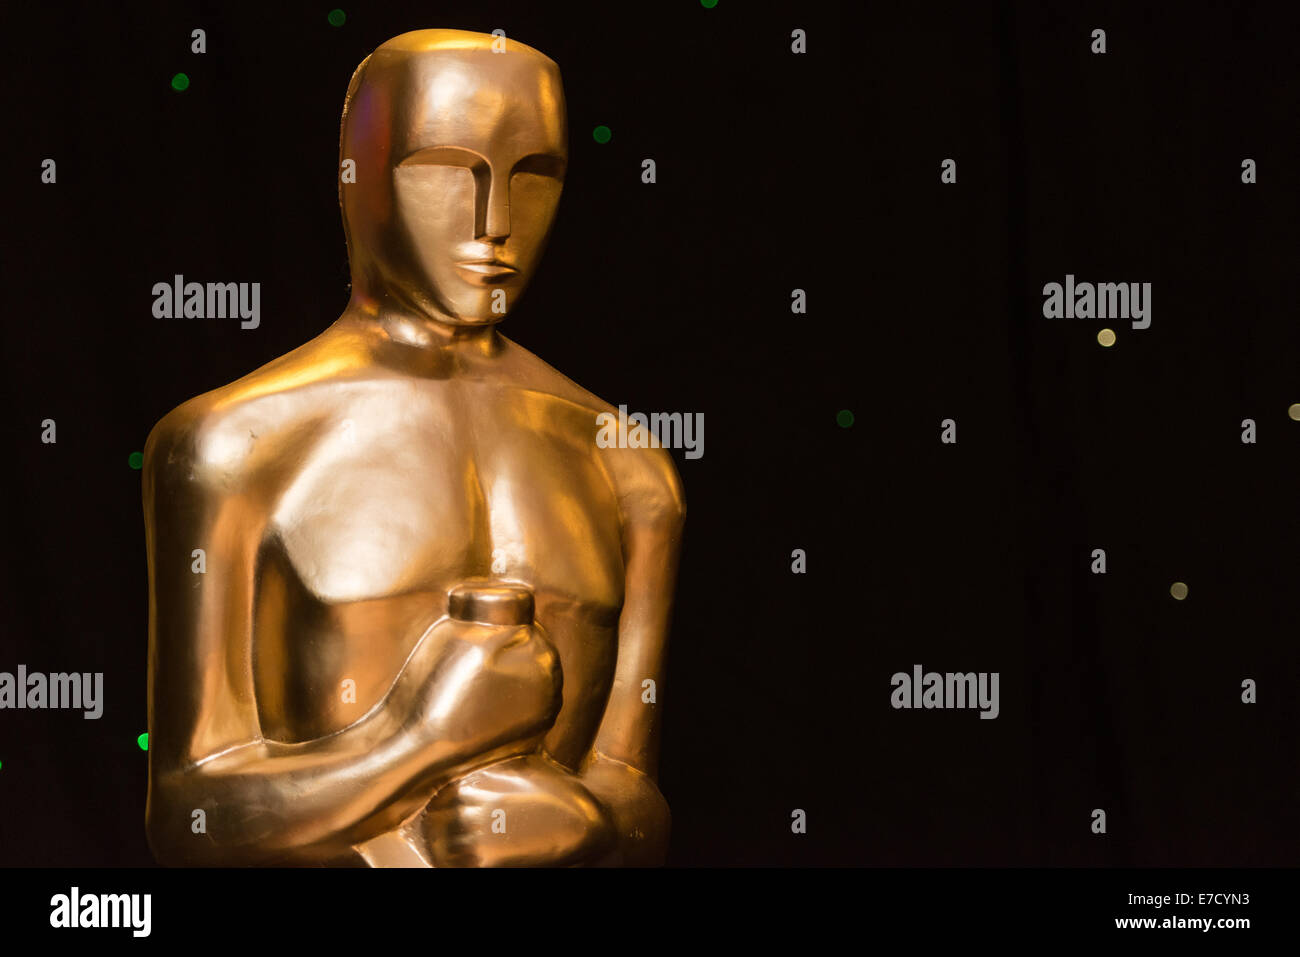 A statue with the likeness of the Oscar / Academy Award statuette at a Hollywood-themed event. Stock Photo